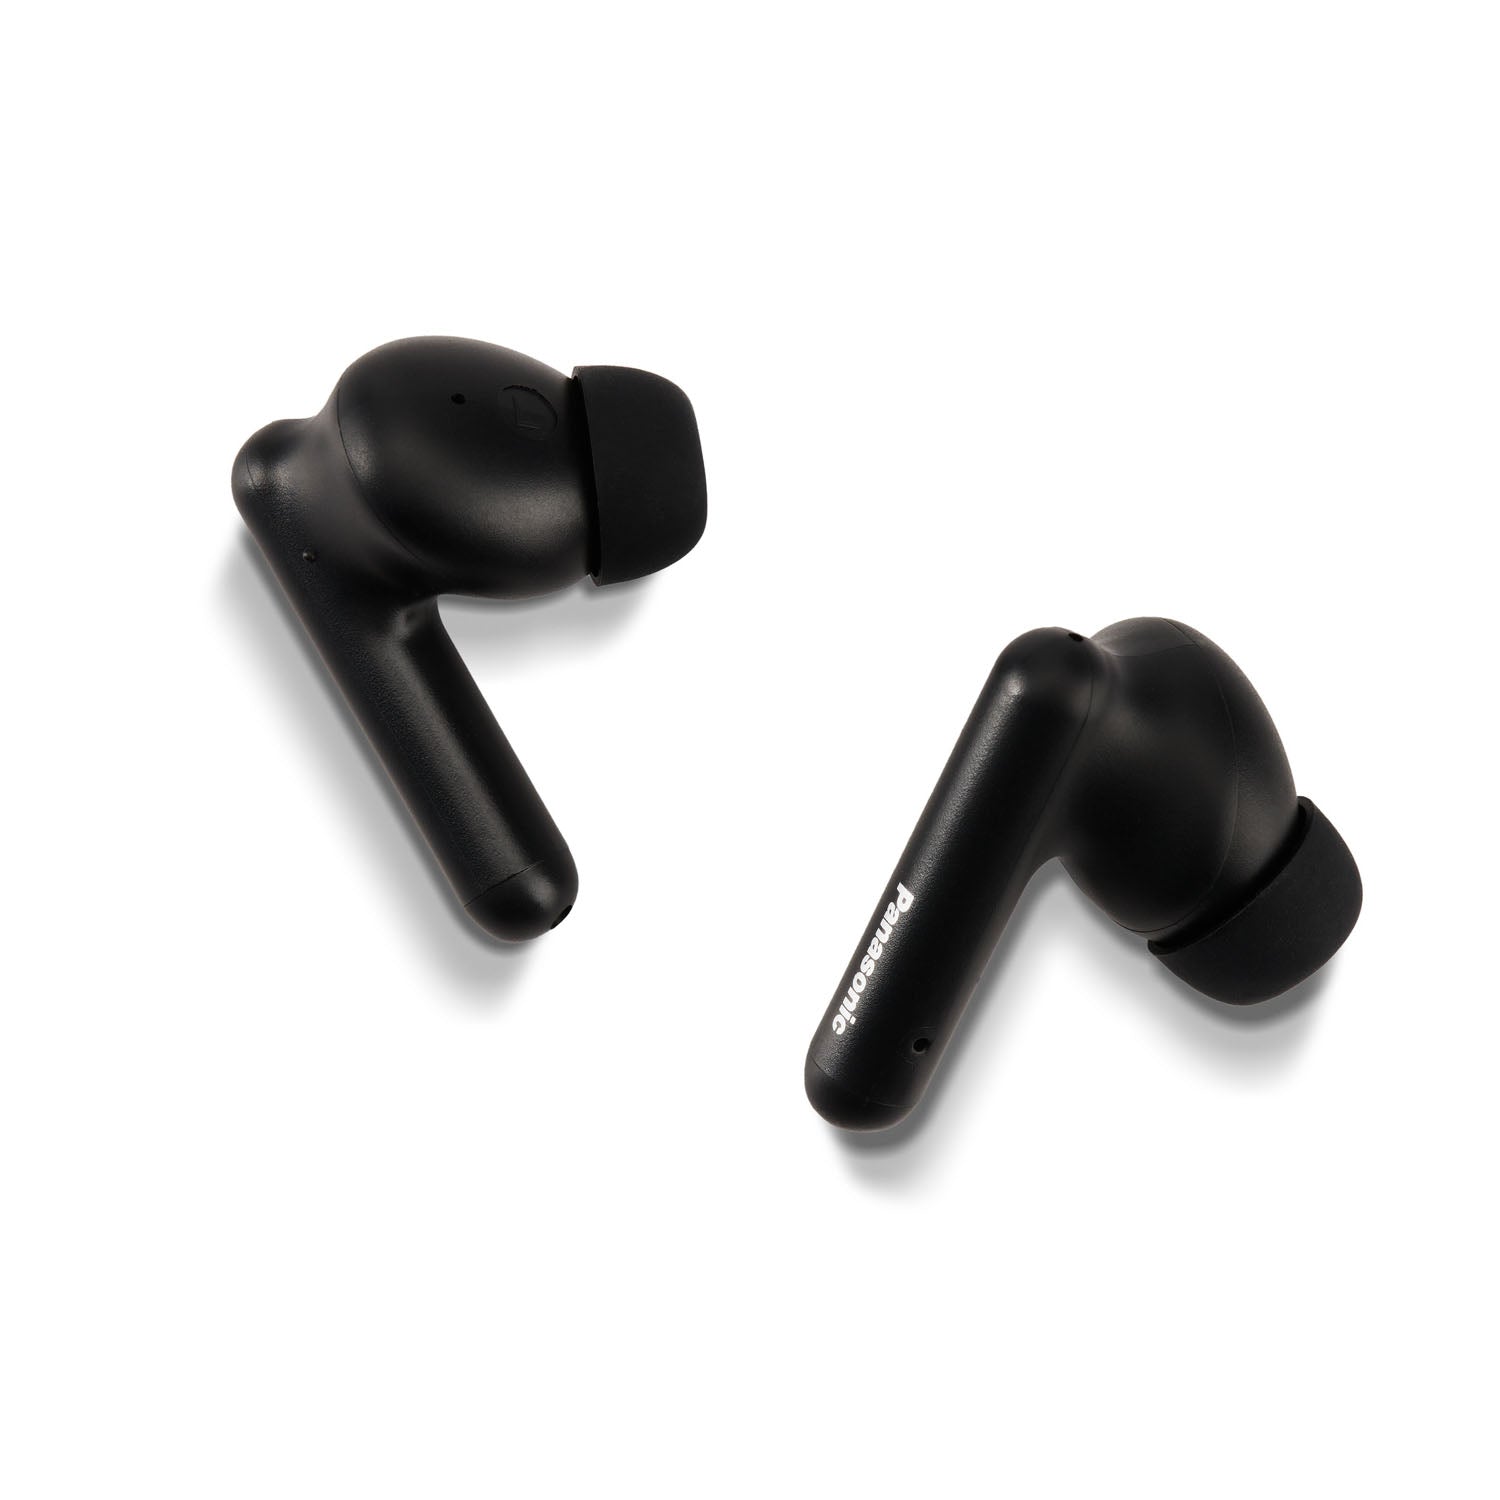 Auriculares Bluetooth Xiaomi Earbuds Basic 2 • GS Electronic